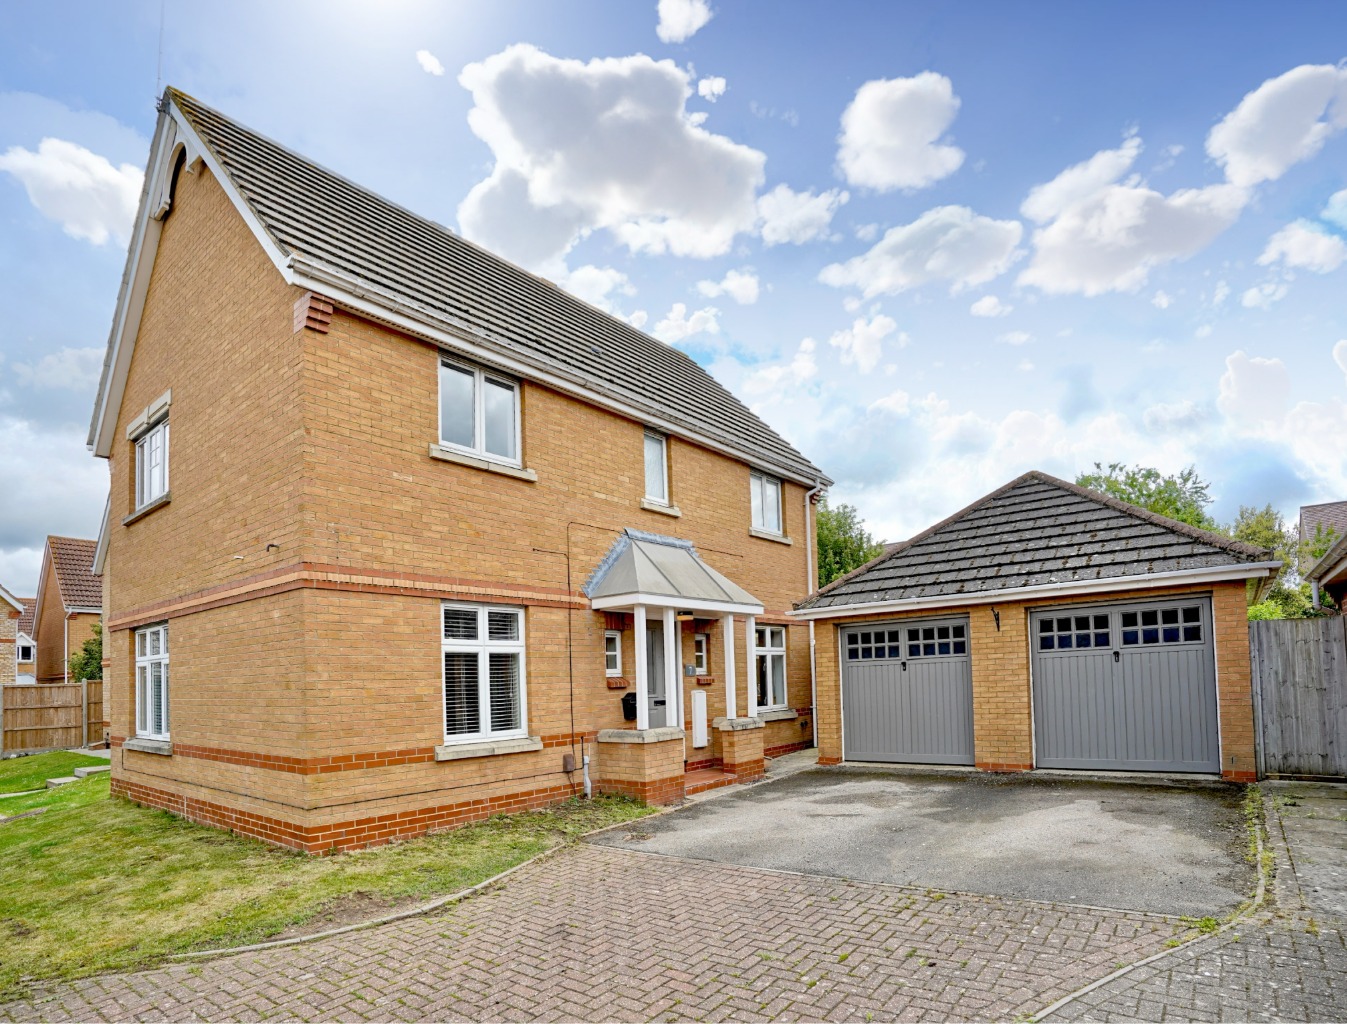 4 bed detached house for sale in Pitfield Close, Huntingdon - Property Image 1